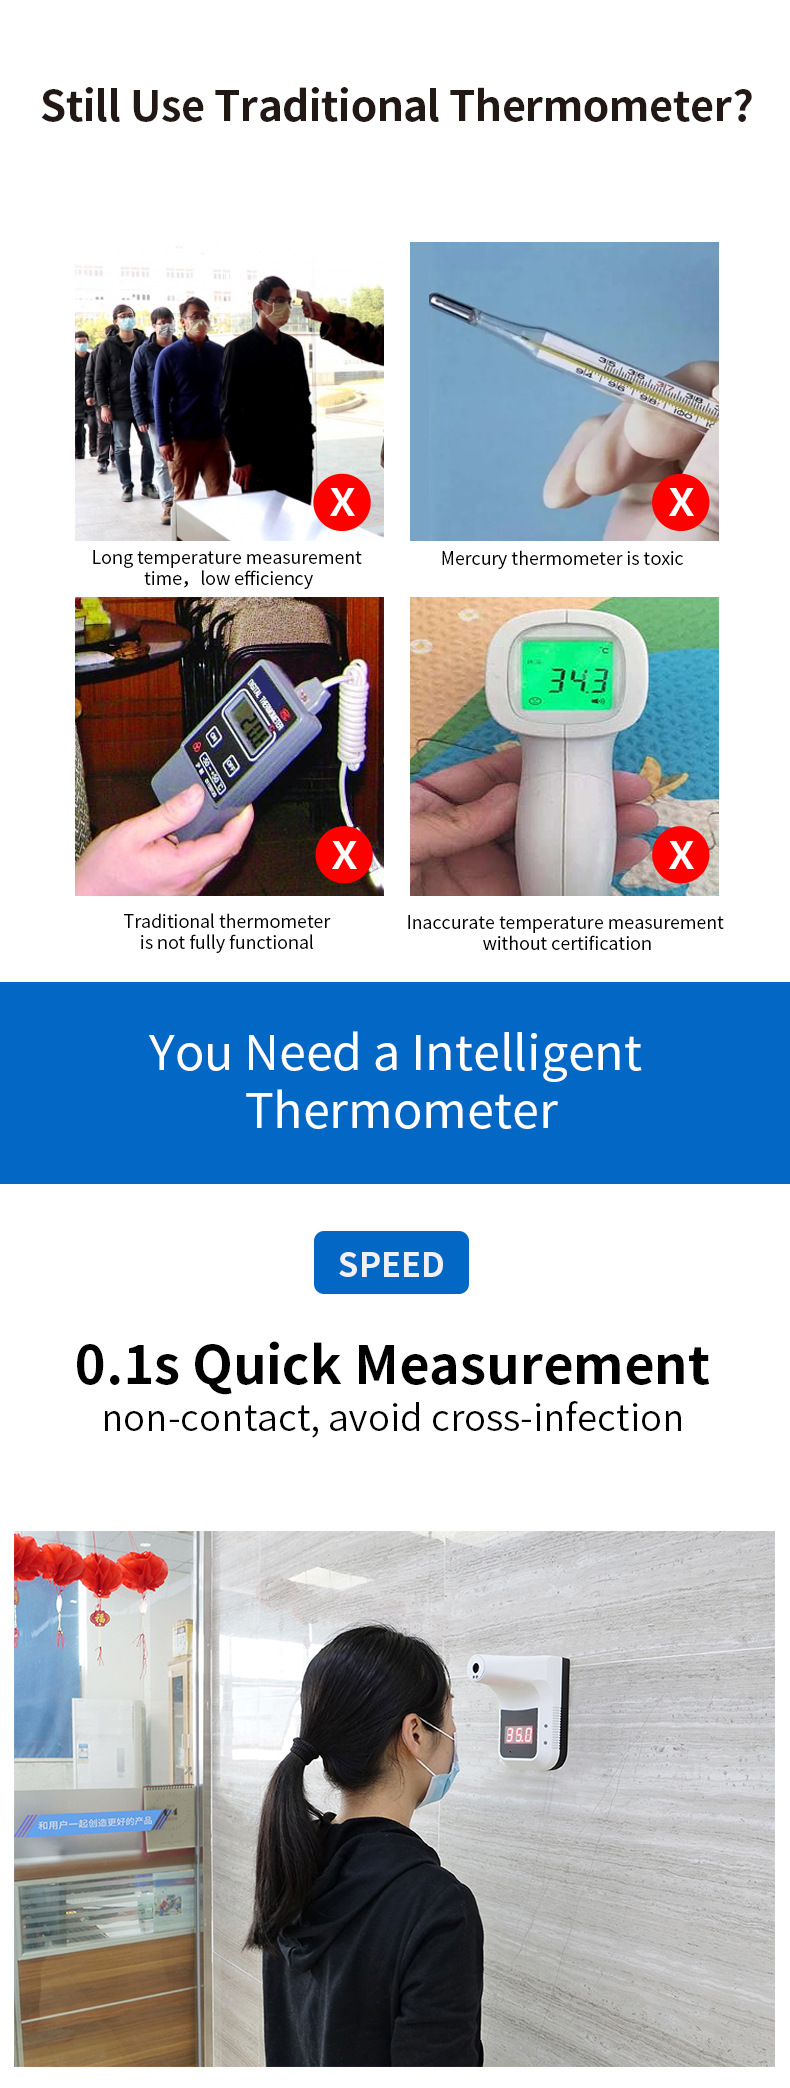 K3-Infrared-Thermometer-Digital-Non-Contact-Wall-Mounted-Fixed-Electronic-Thermometer-1826496-2